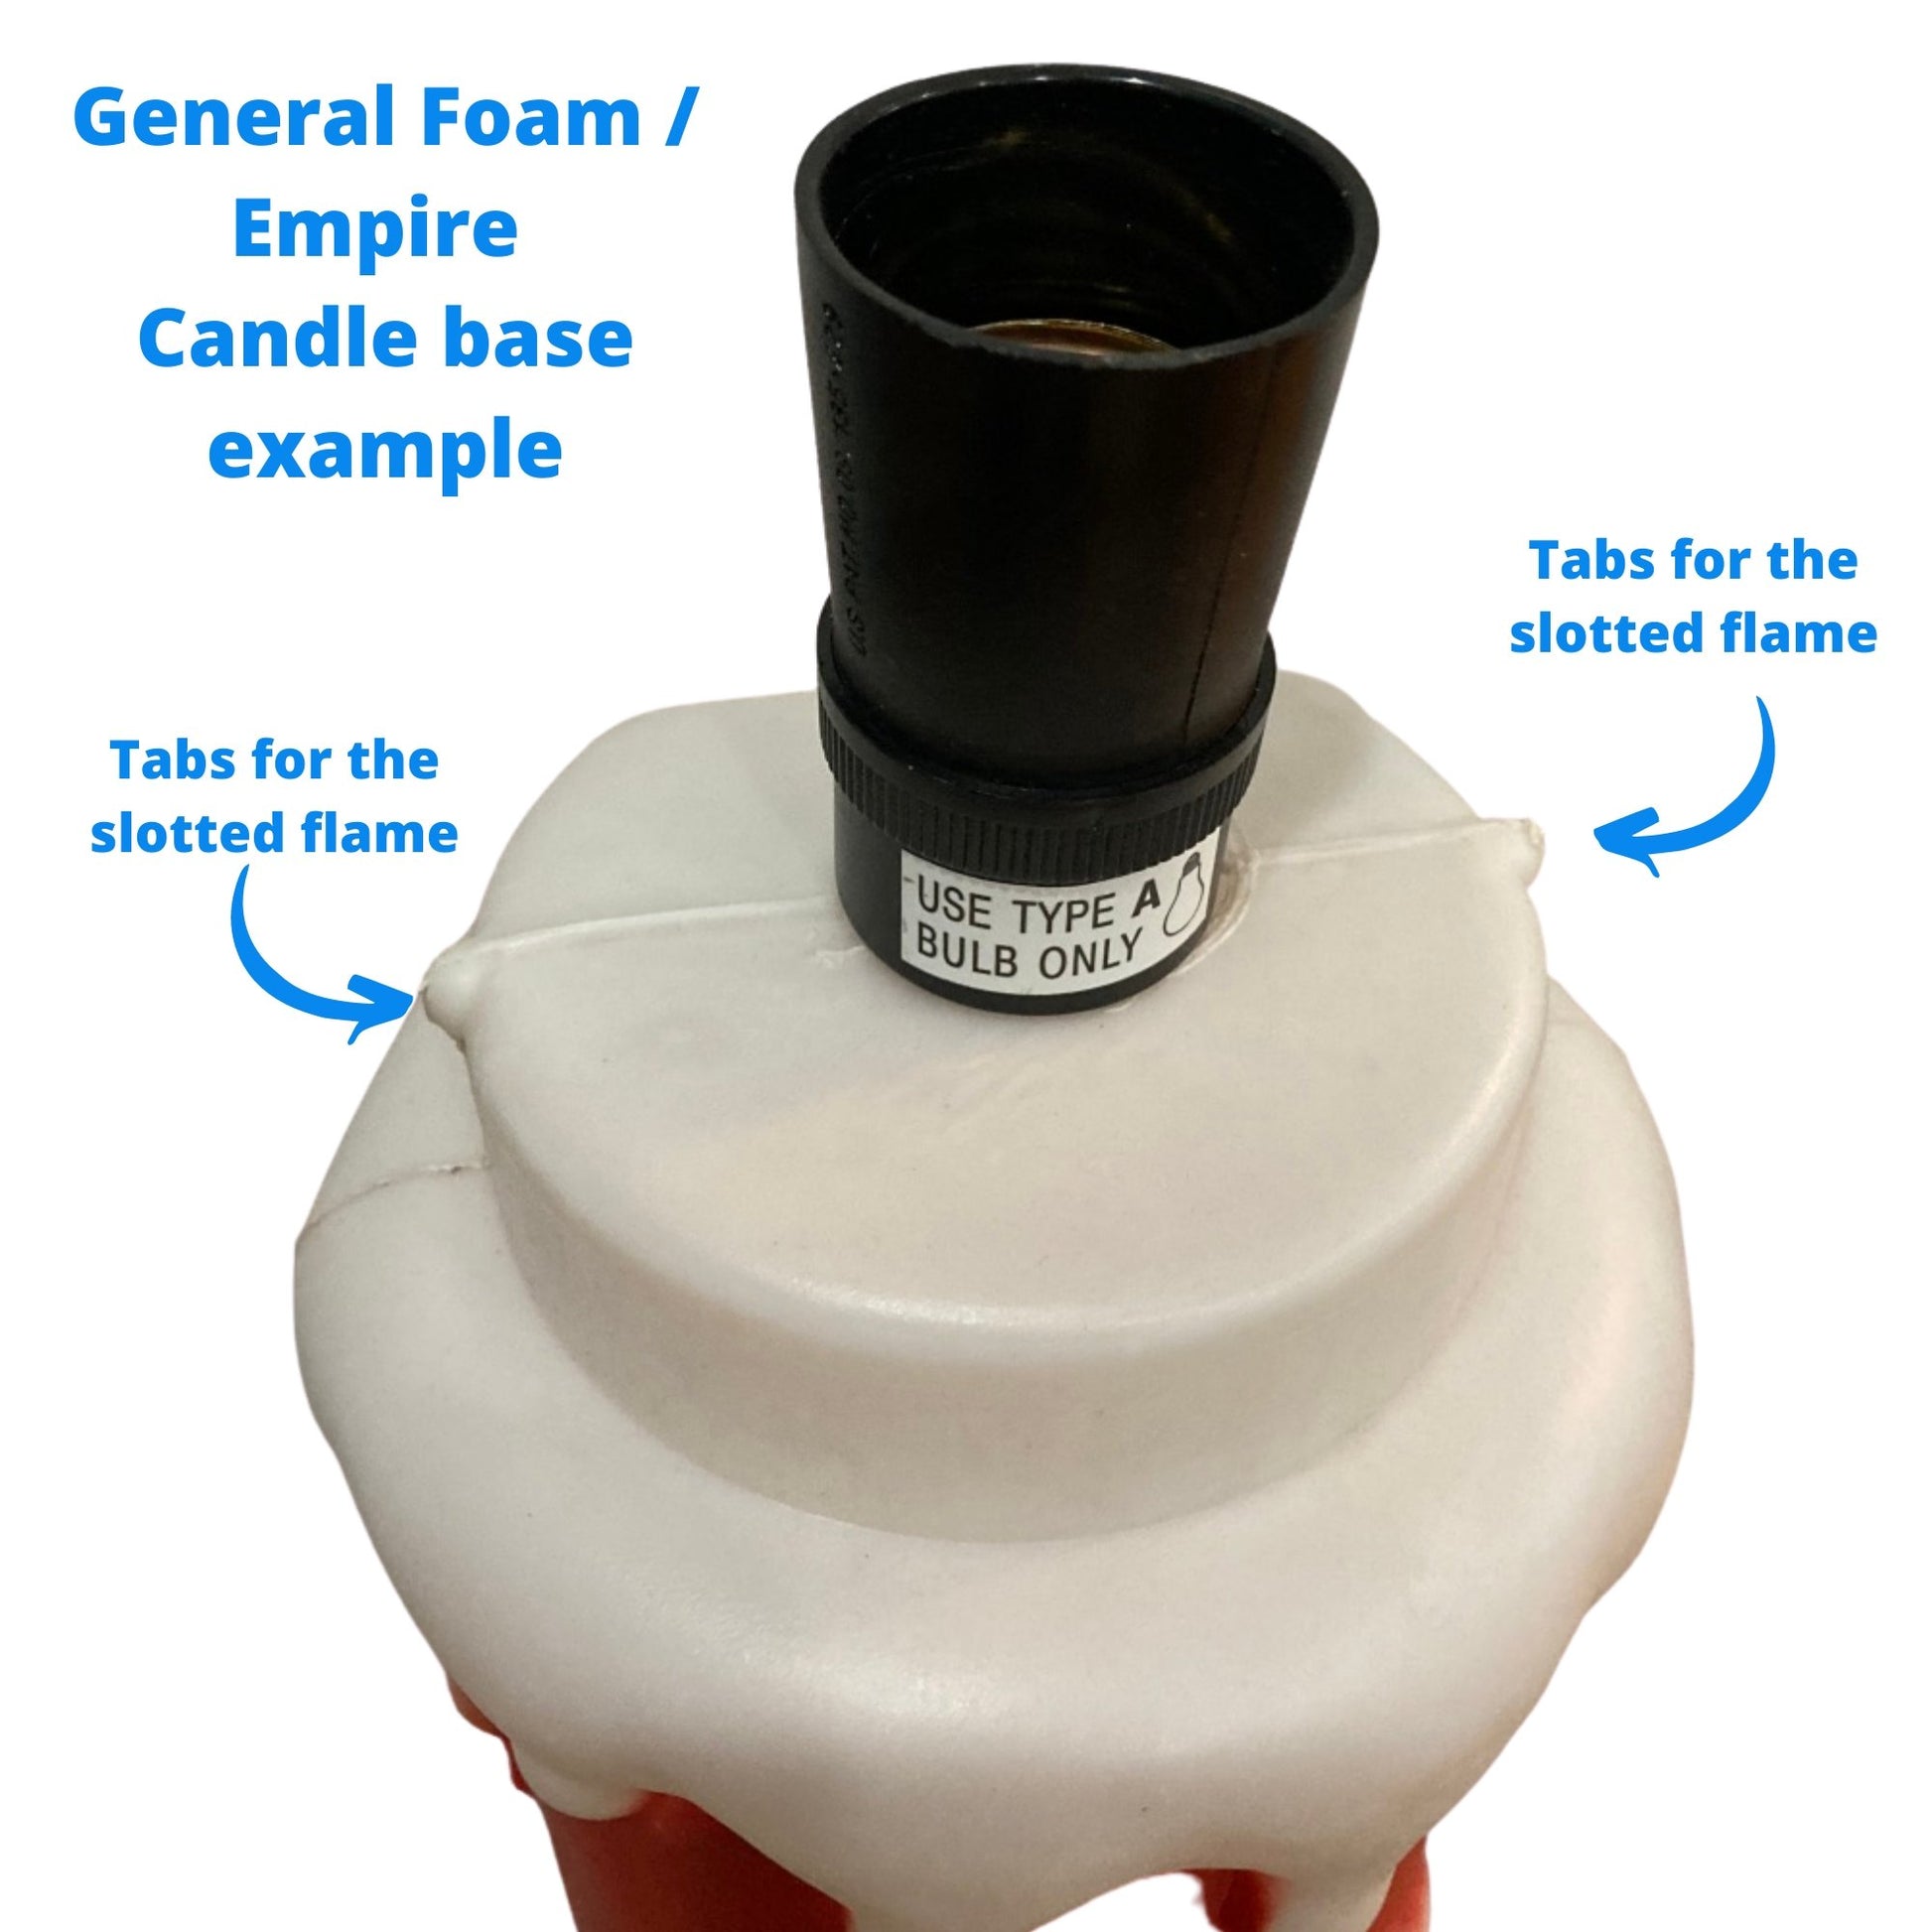 Candle Flame for 38" Empire or General Foam Noel Candles - Blow Mold Store